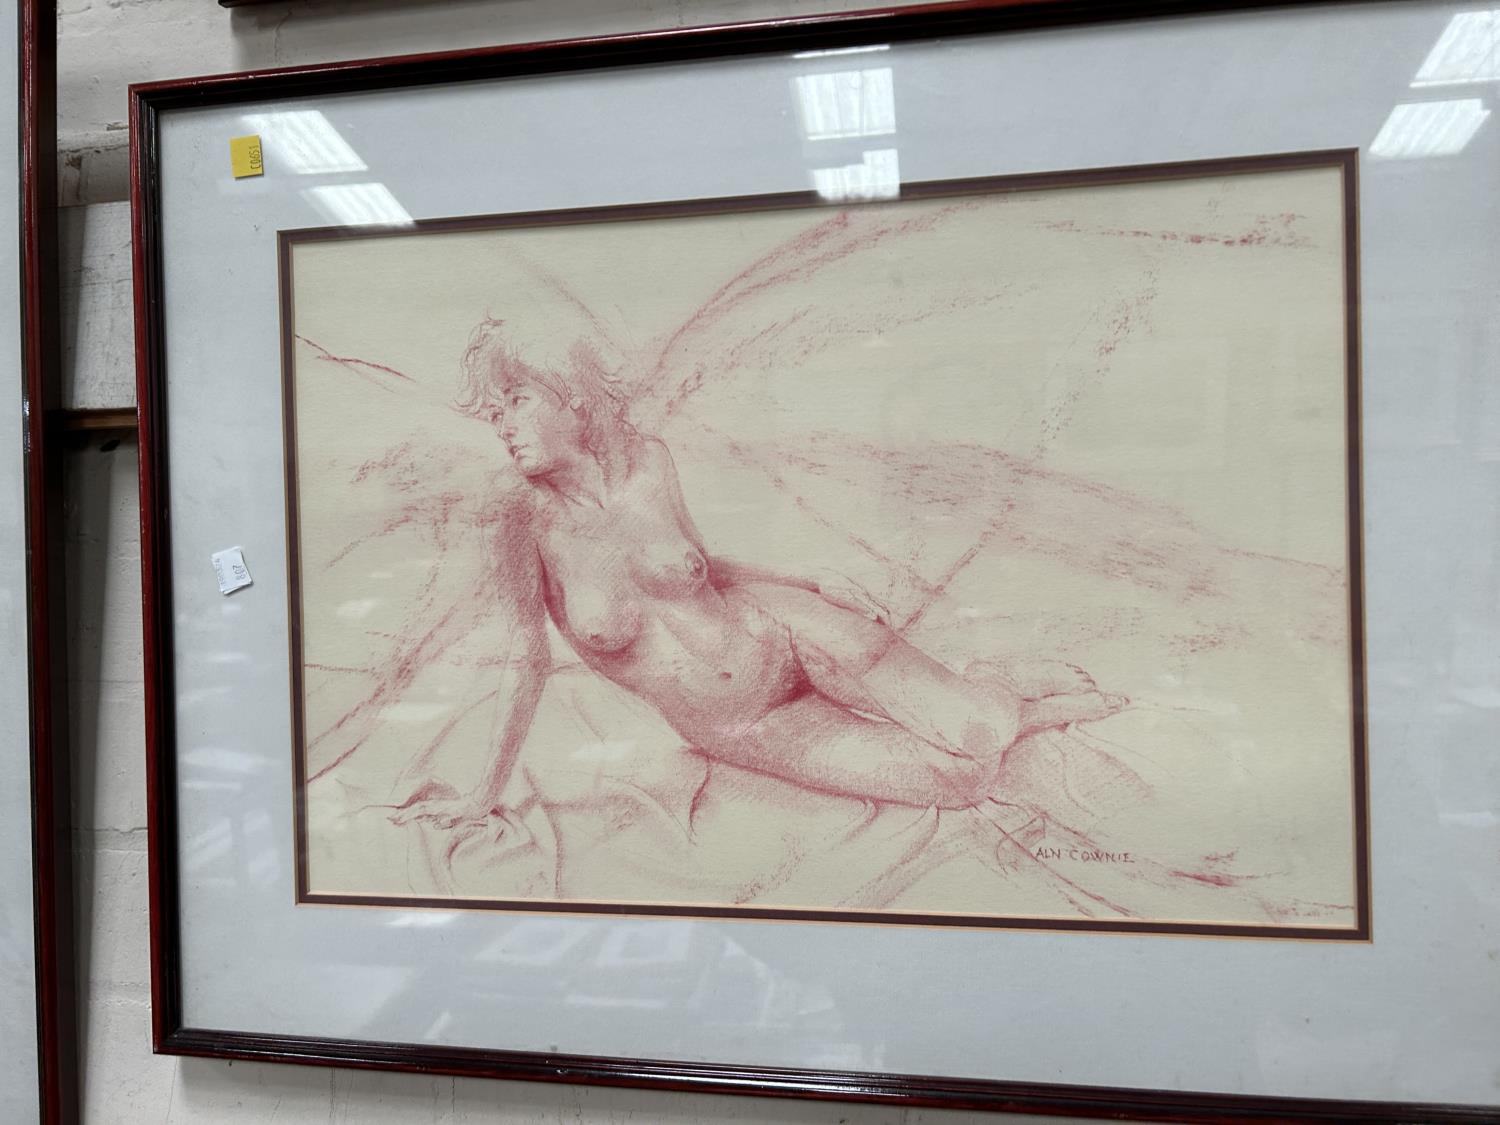 Alan Cownie (Welsh 1927-2015):  3 female nude studies, monochrome pastel sketches, signed, 47 x - Image 2 of 4